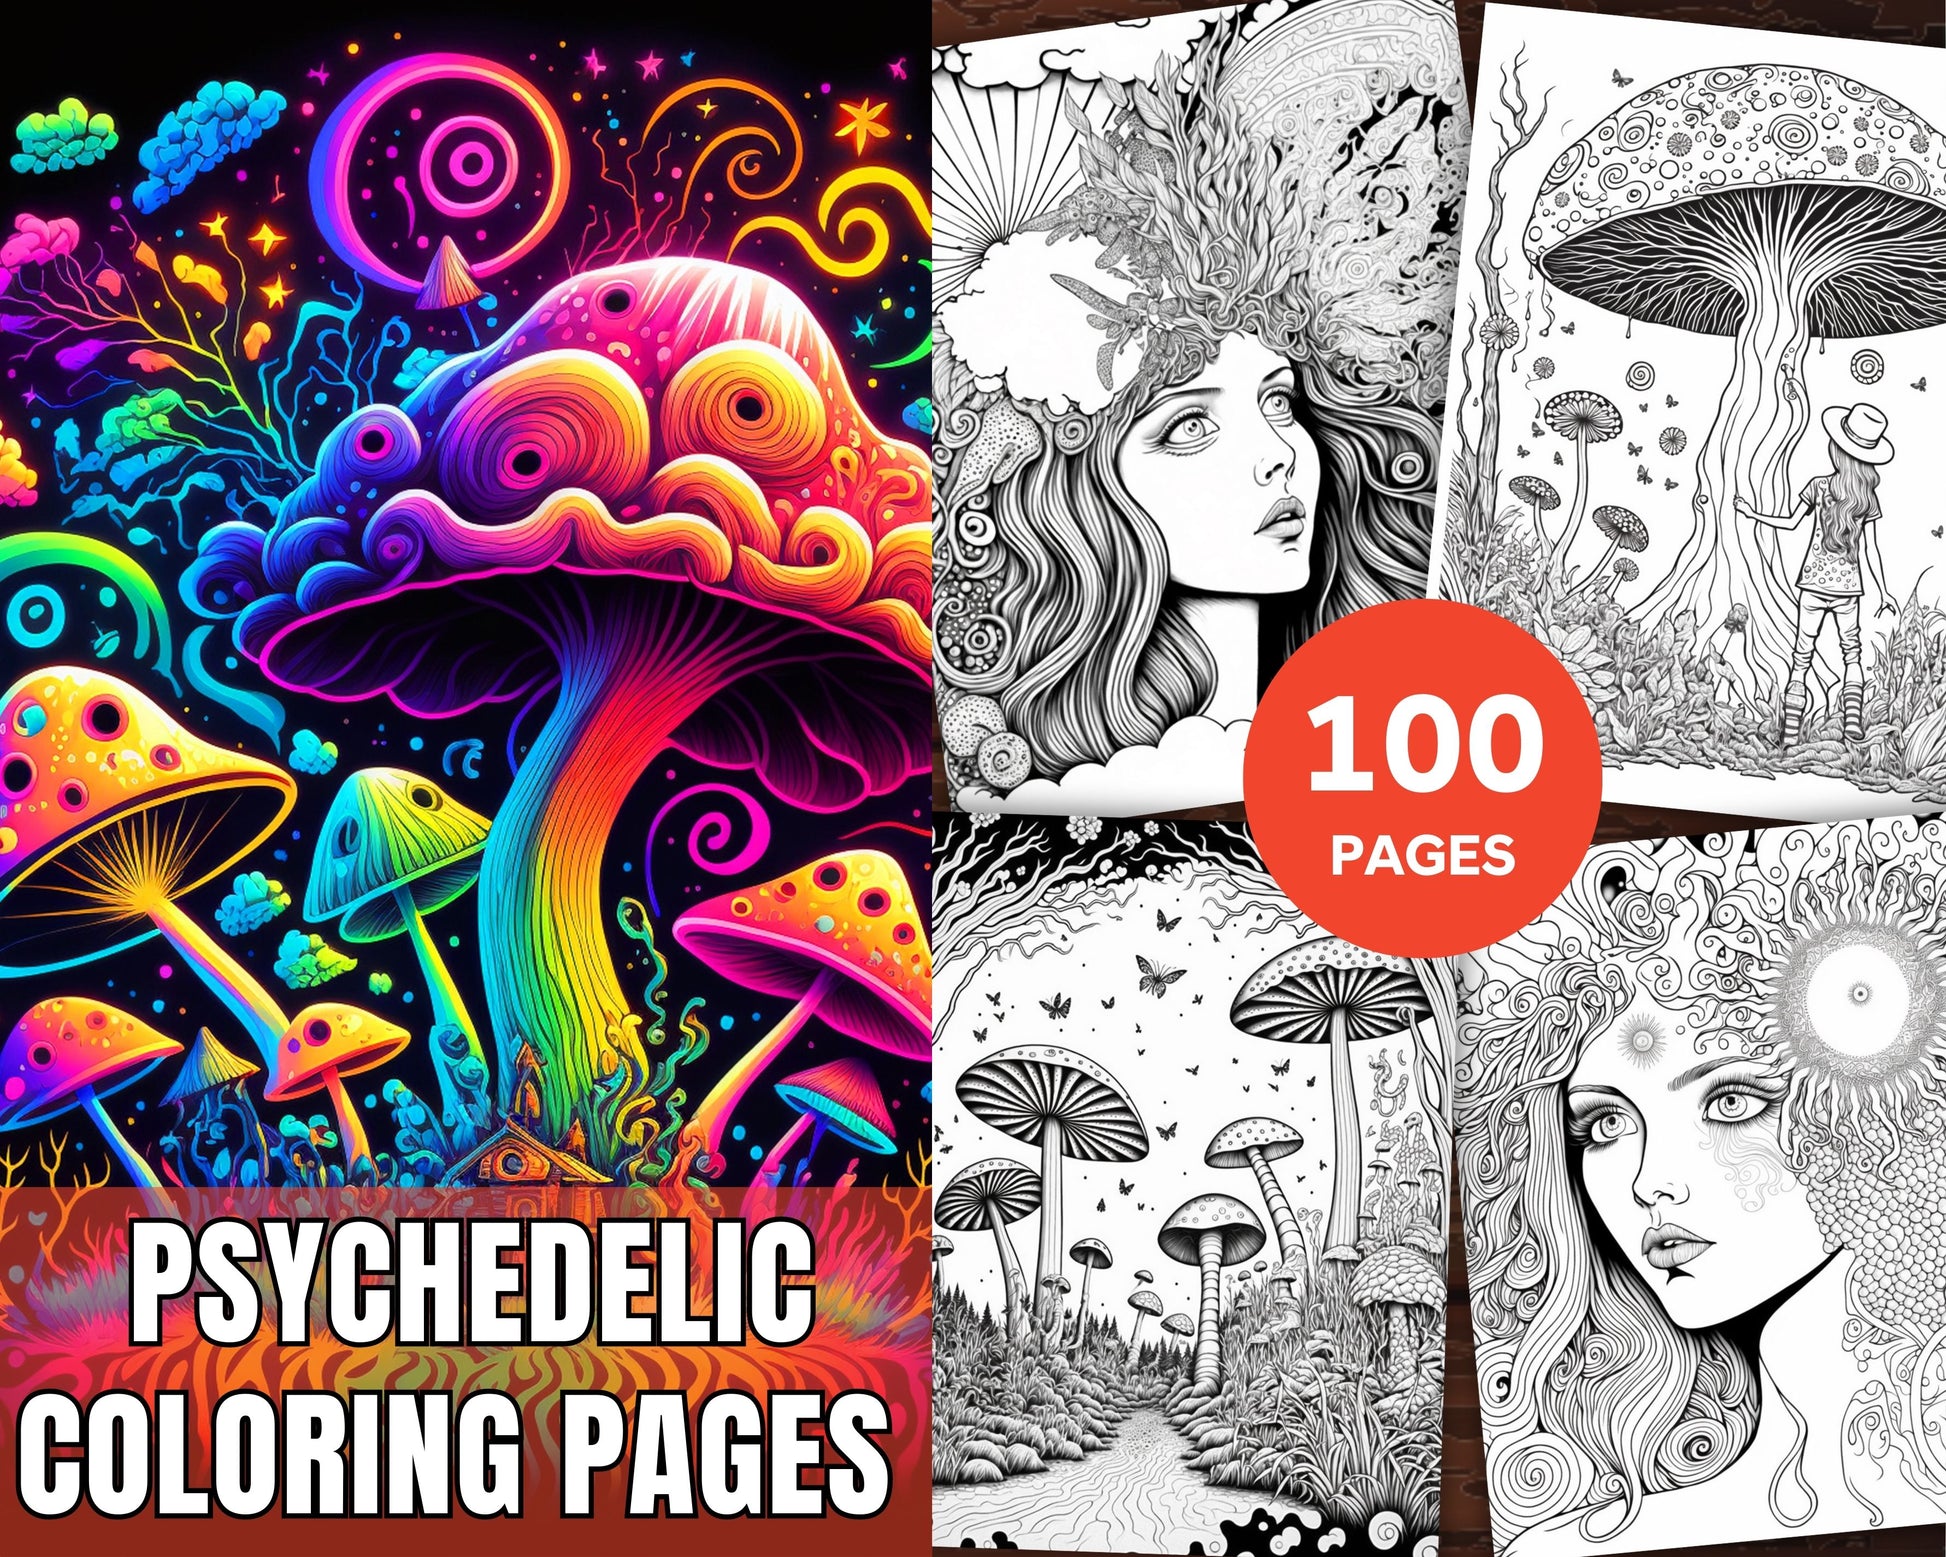 100 Psychedelic Coloring Pages Printable for Adults, Trippy Coloring Pages, Grayscale Coloring Book, Printable PDF File Instant Download - raspiee